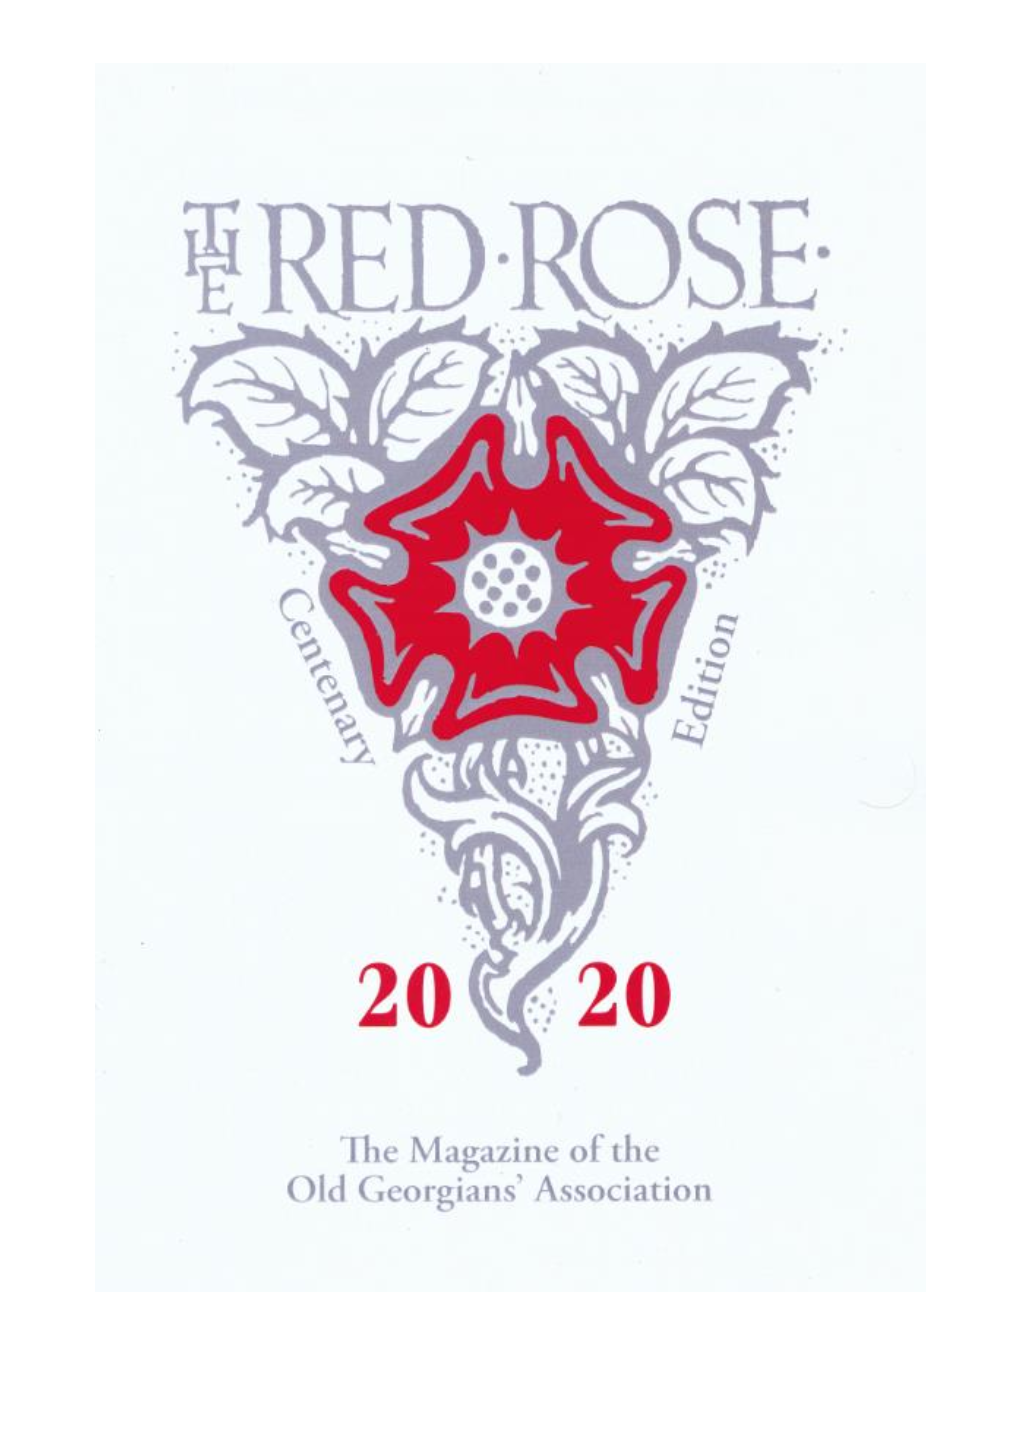 The Red Rose 2020